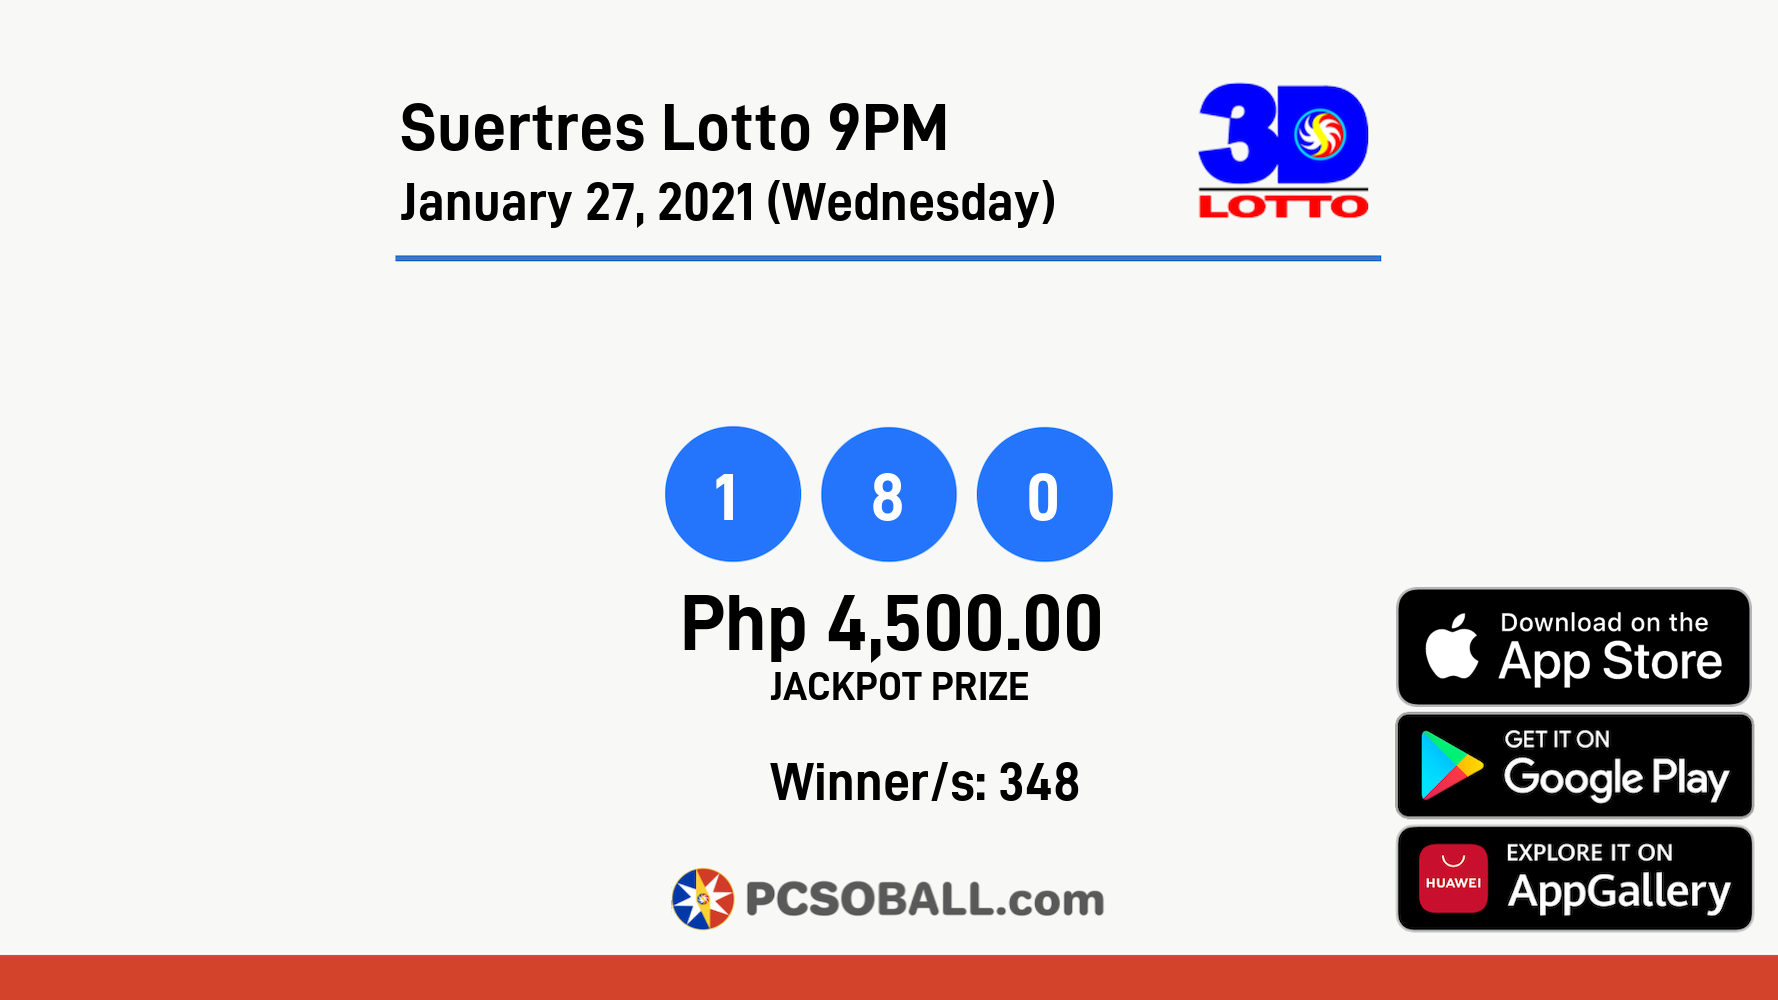 Suertres Lotto 9PM January 27, 2021 (Wednesday) Result